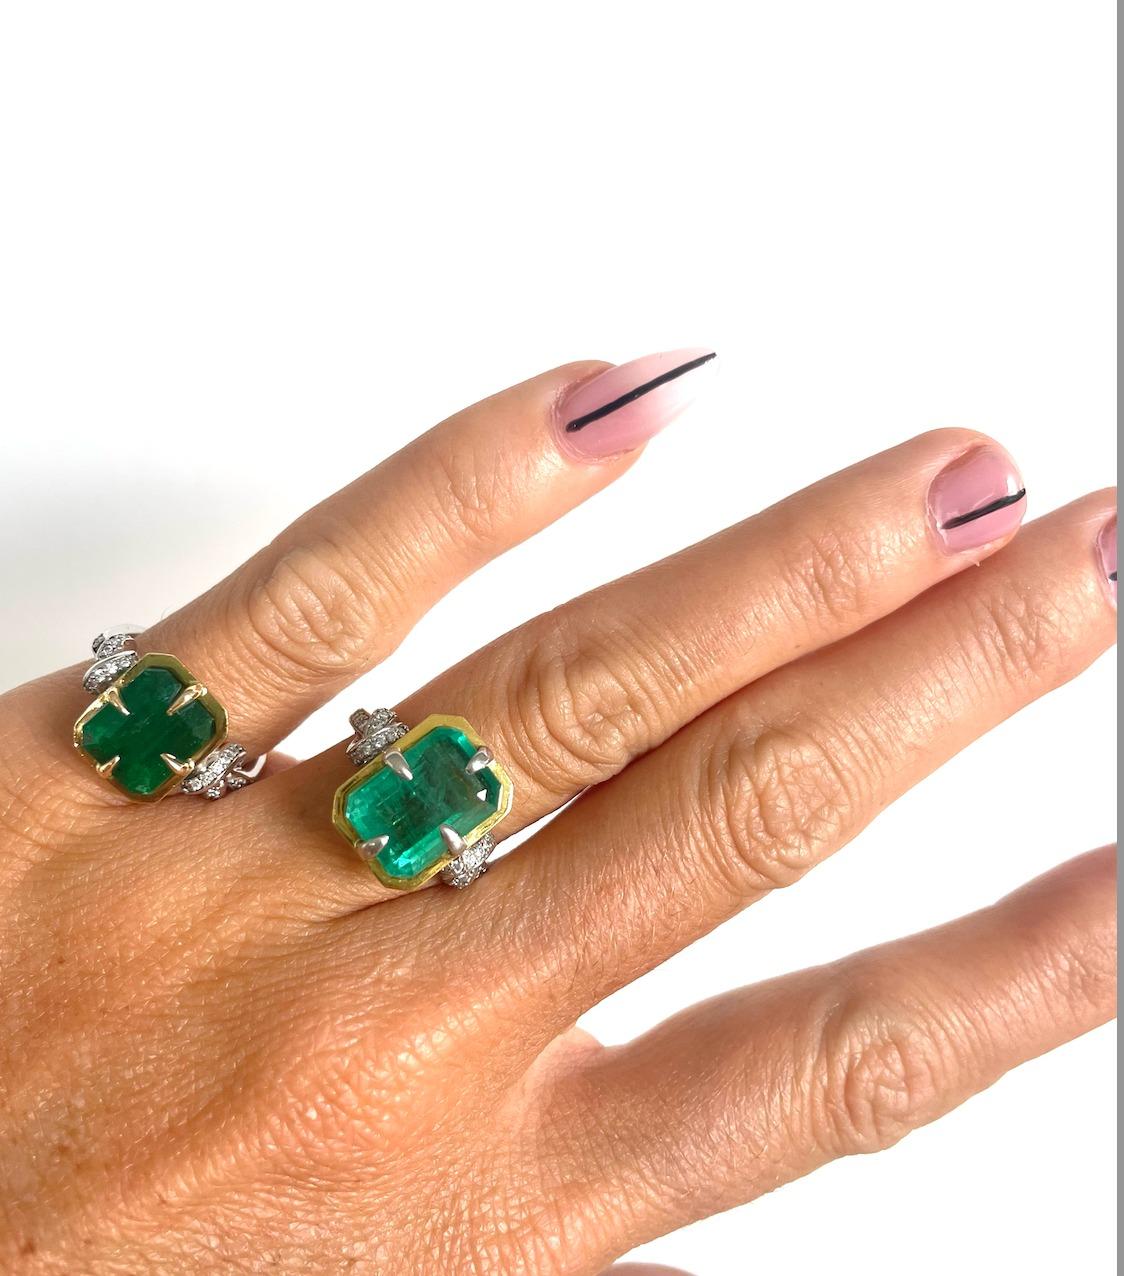 5.79 Carat Zambian Emerald in Forget Me Knot Style Ring with Diamonds 3